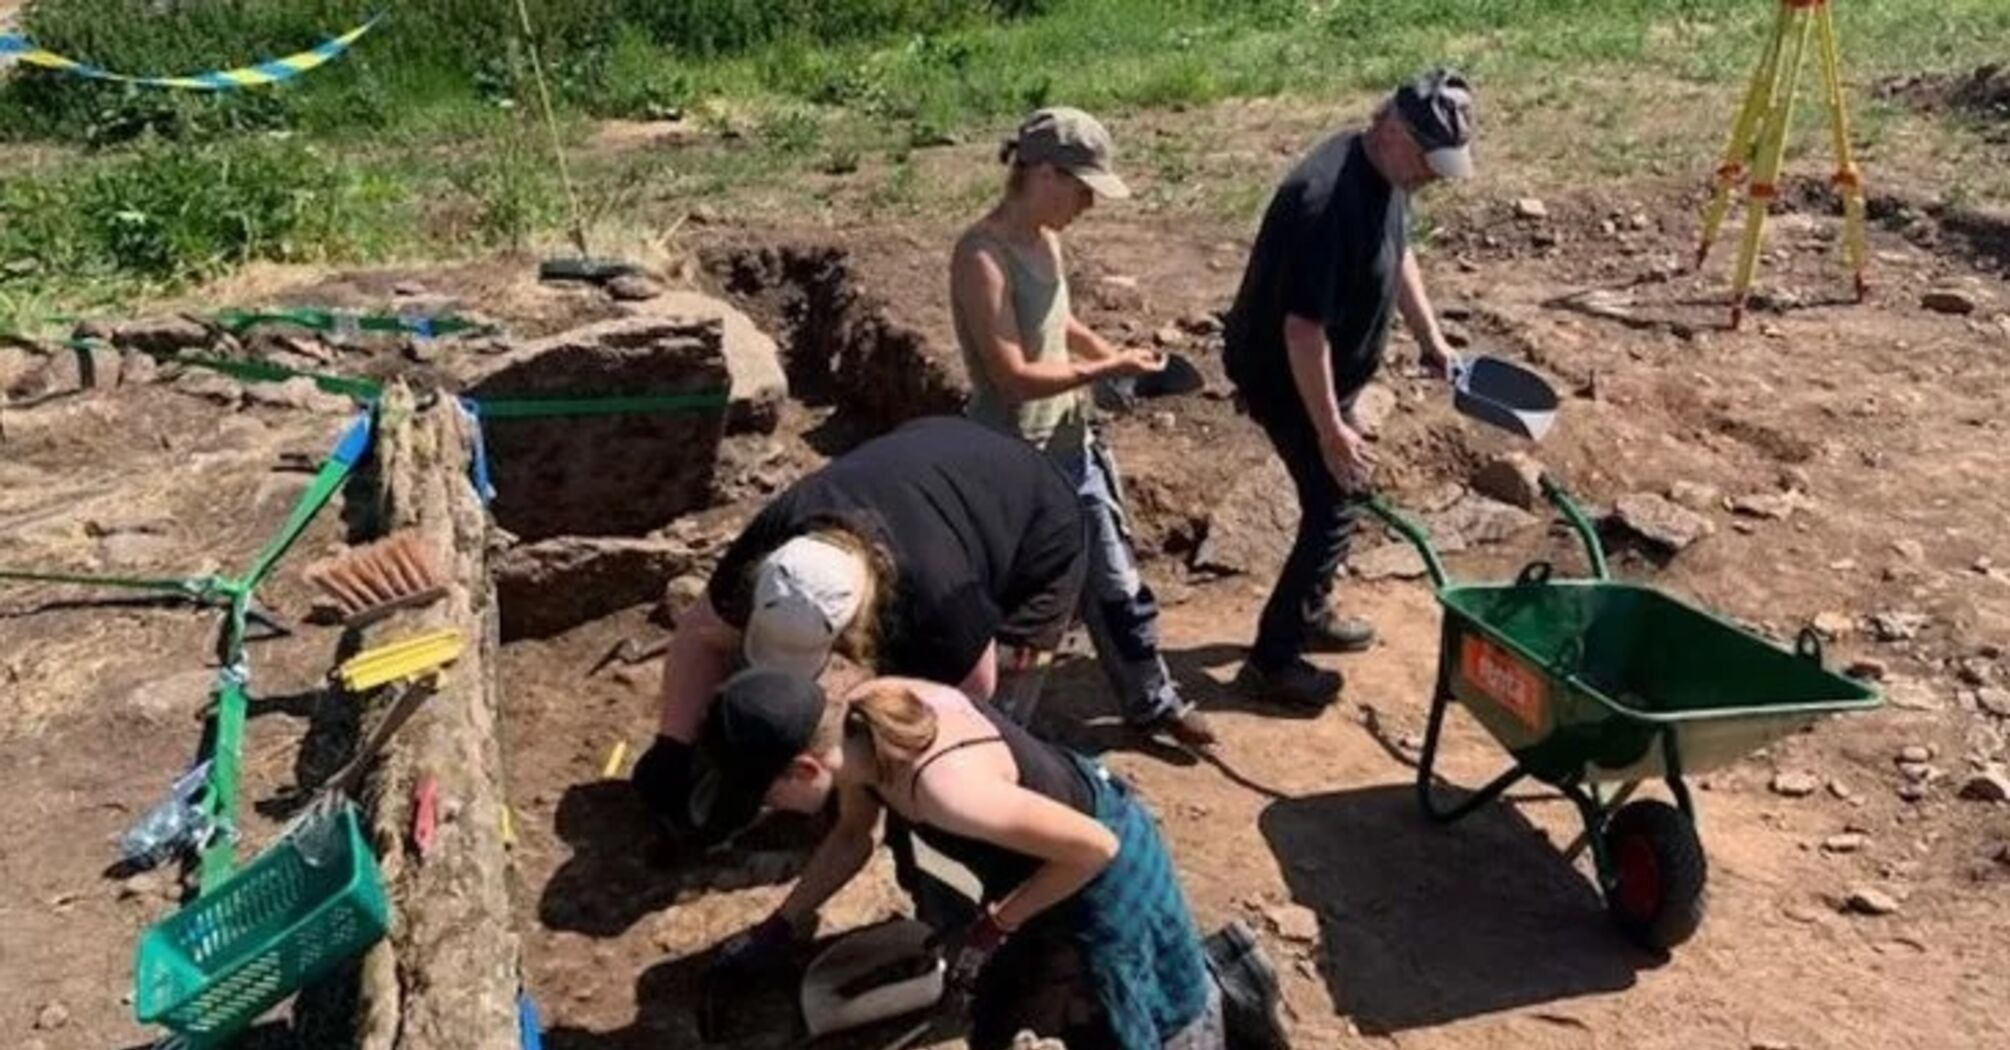 A gruesome burial was found in Sweden: skeletons of people lack skulls (photos)